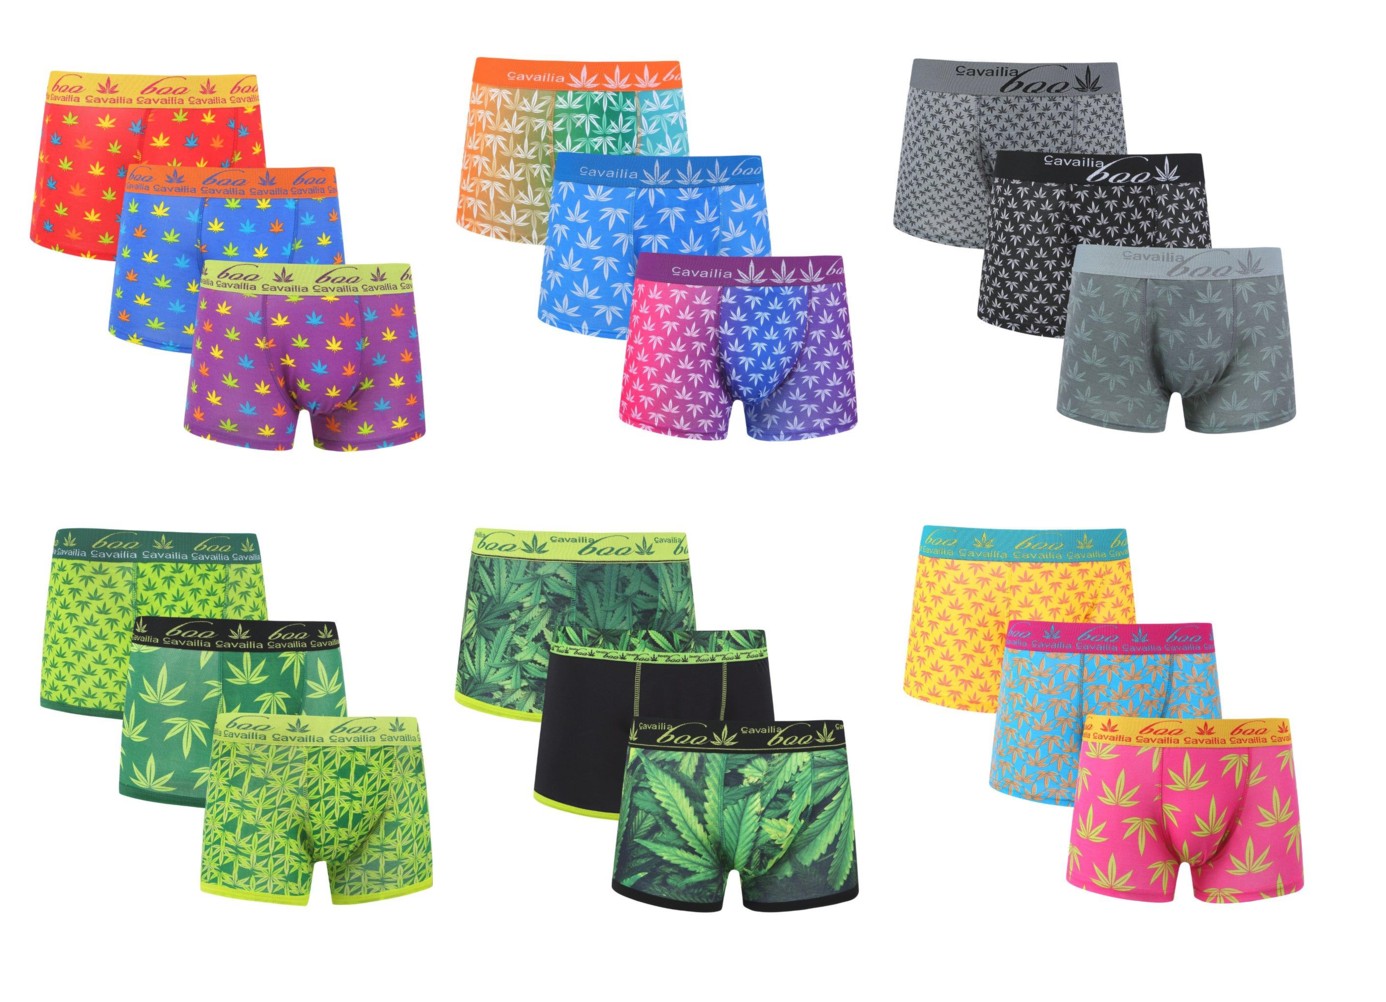 Men's Weeds leaves Cotton Rich Underwear Trunks Boxer Shorts Hipster ...